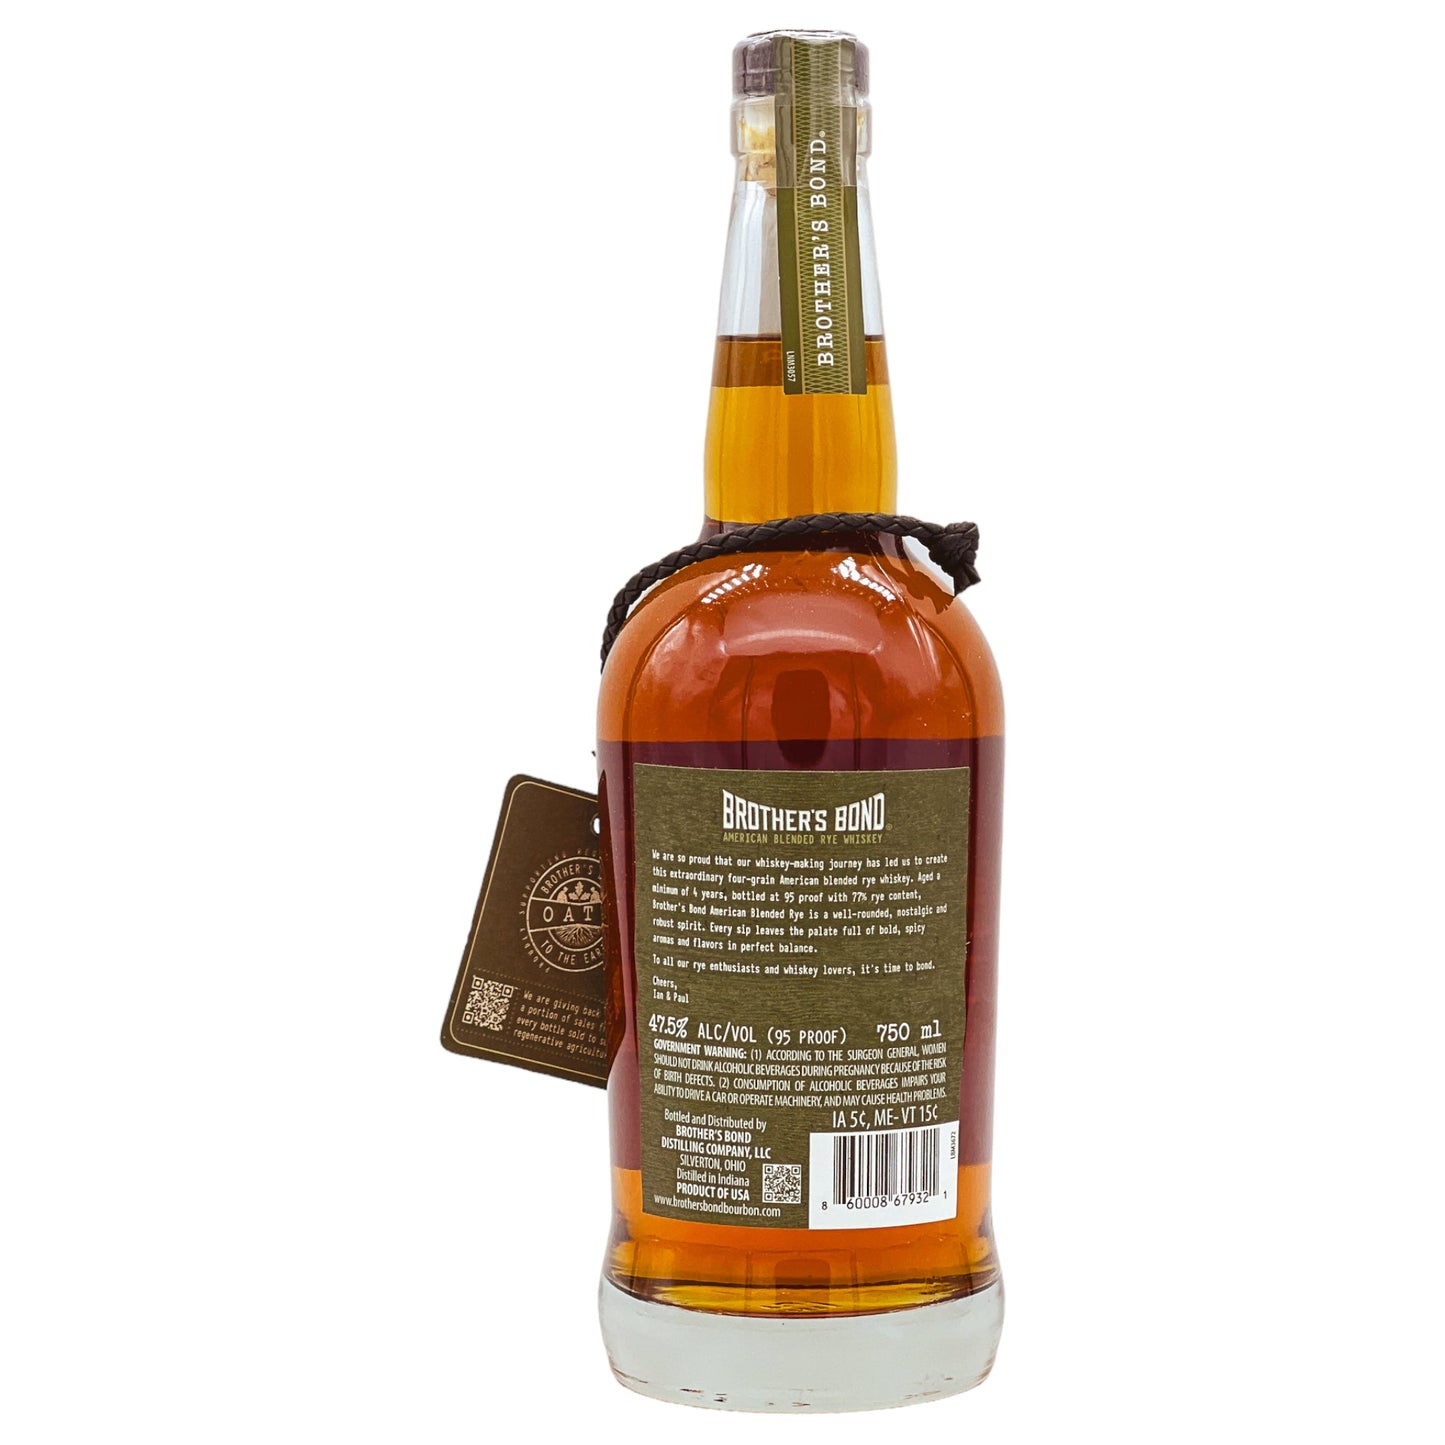 Brother’s Bond | American Blended Rye Whiskey | 0,75l | 47,5%GET A BOTTLE